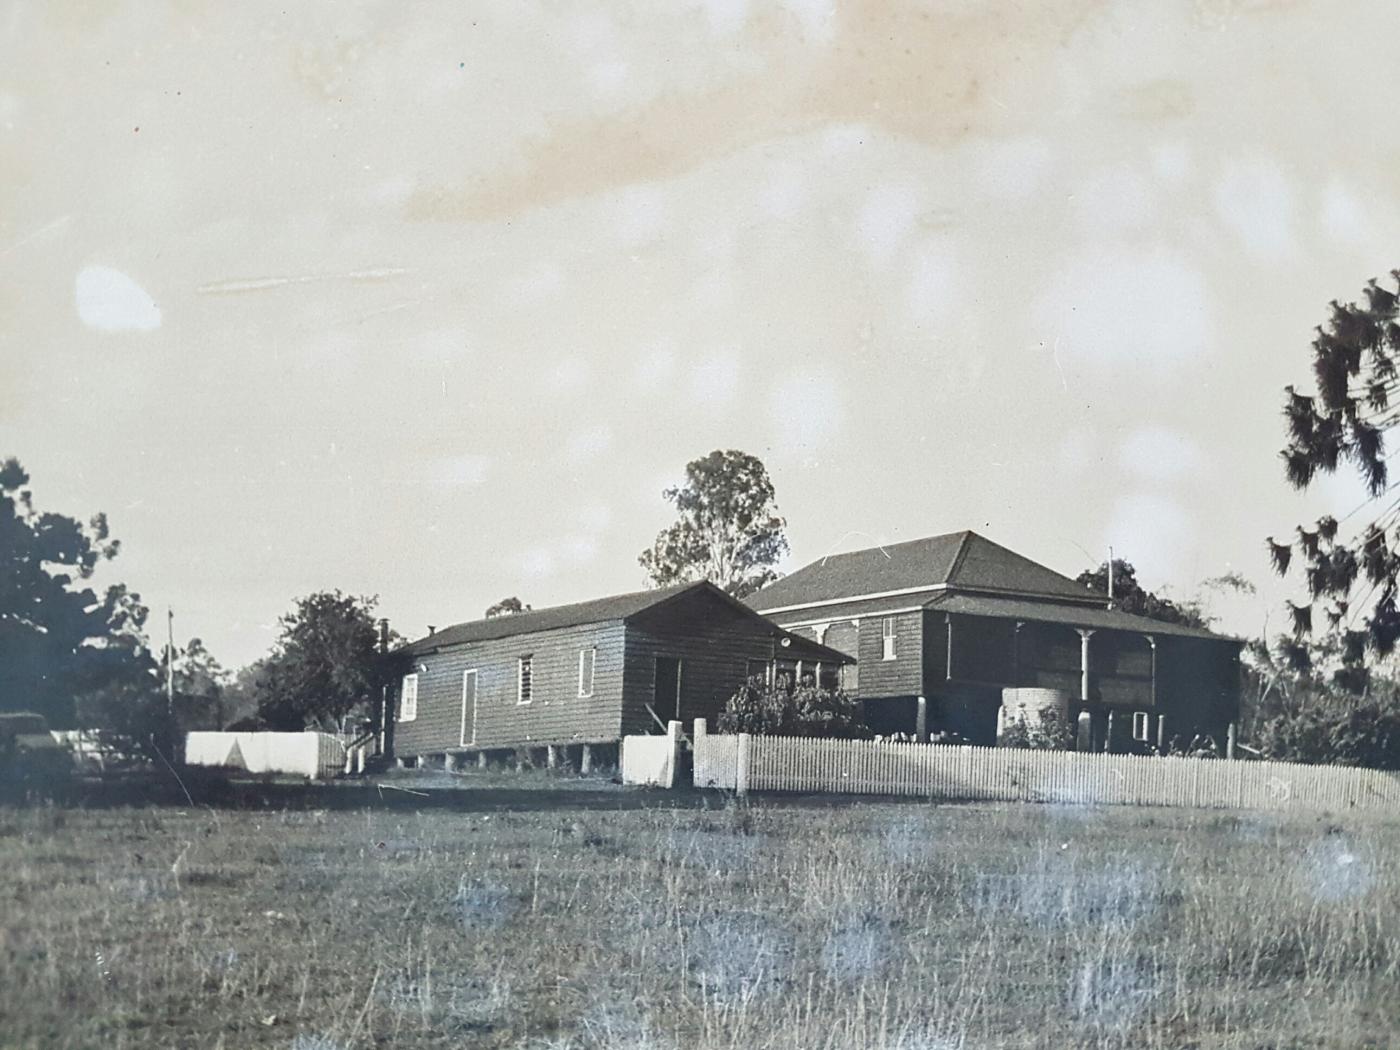 Black and white photograph of Kilburnie Homestead, taken approx 1950.   There is a single-storey detached kitchen and storeroom on the left, and the larger two-storey living areas of the homestead on the right.  A white picket fence and trees surround the structures.